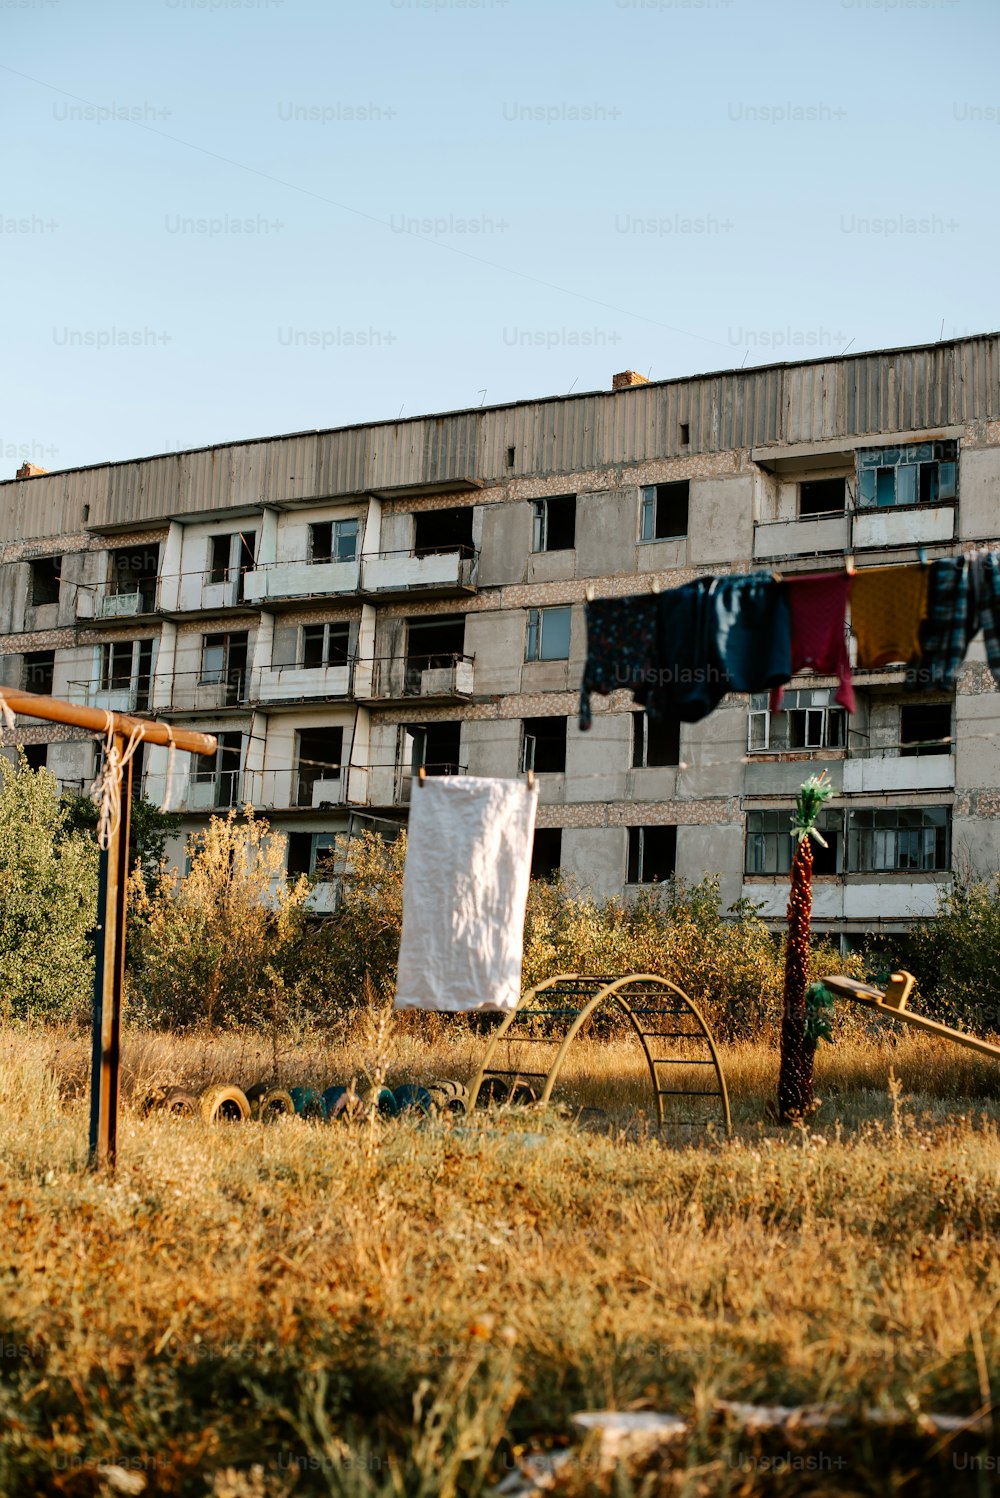 an abandoned building with clothes hanging out to dry